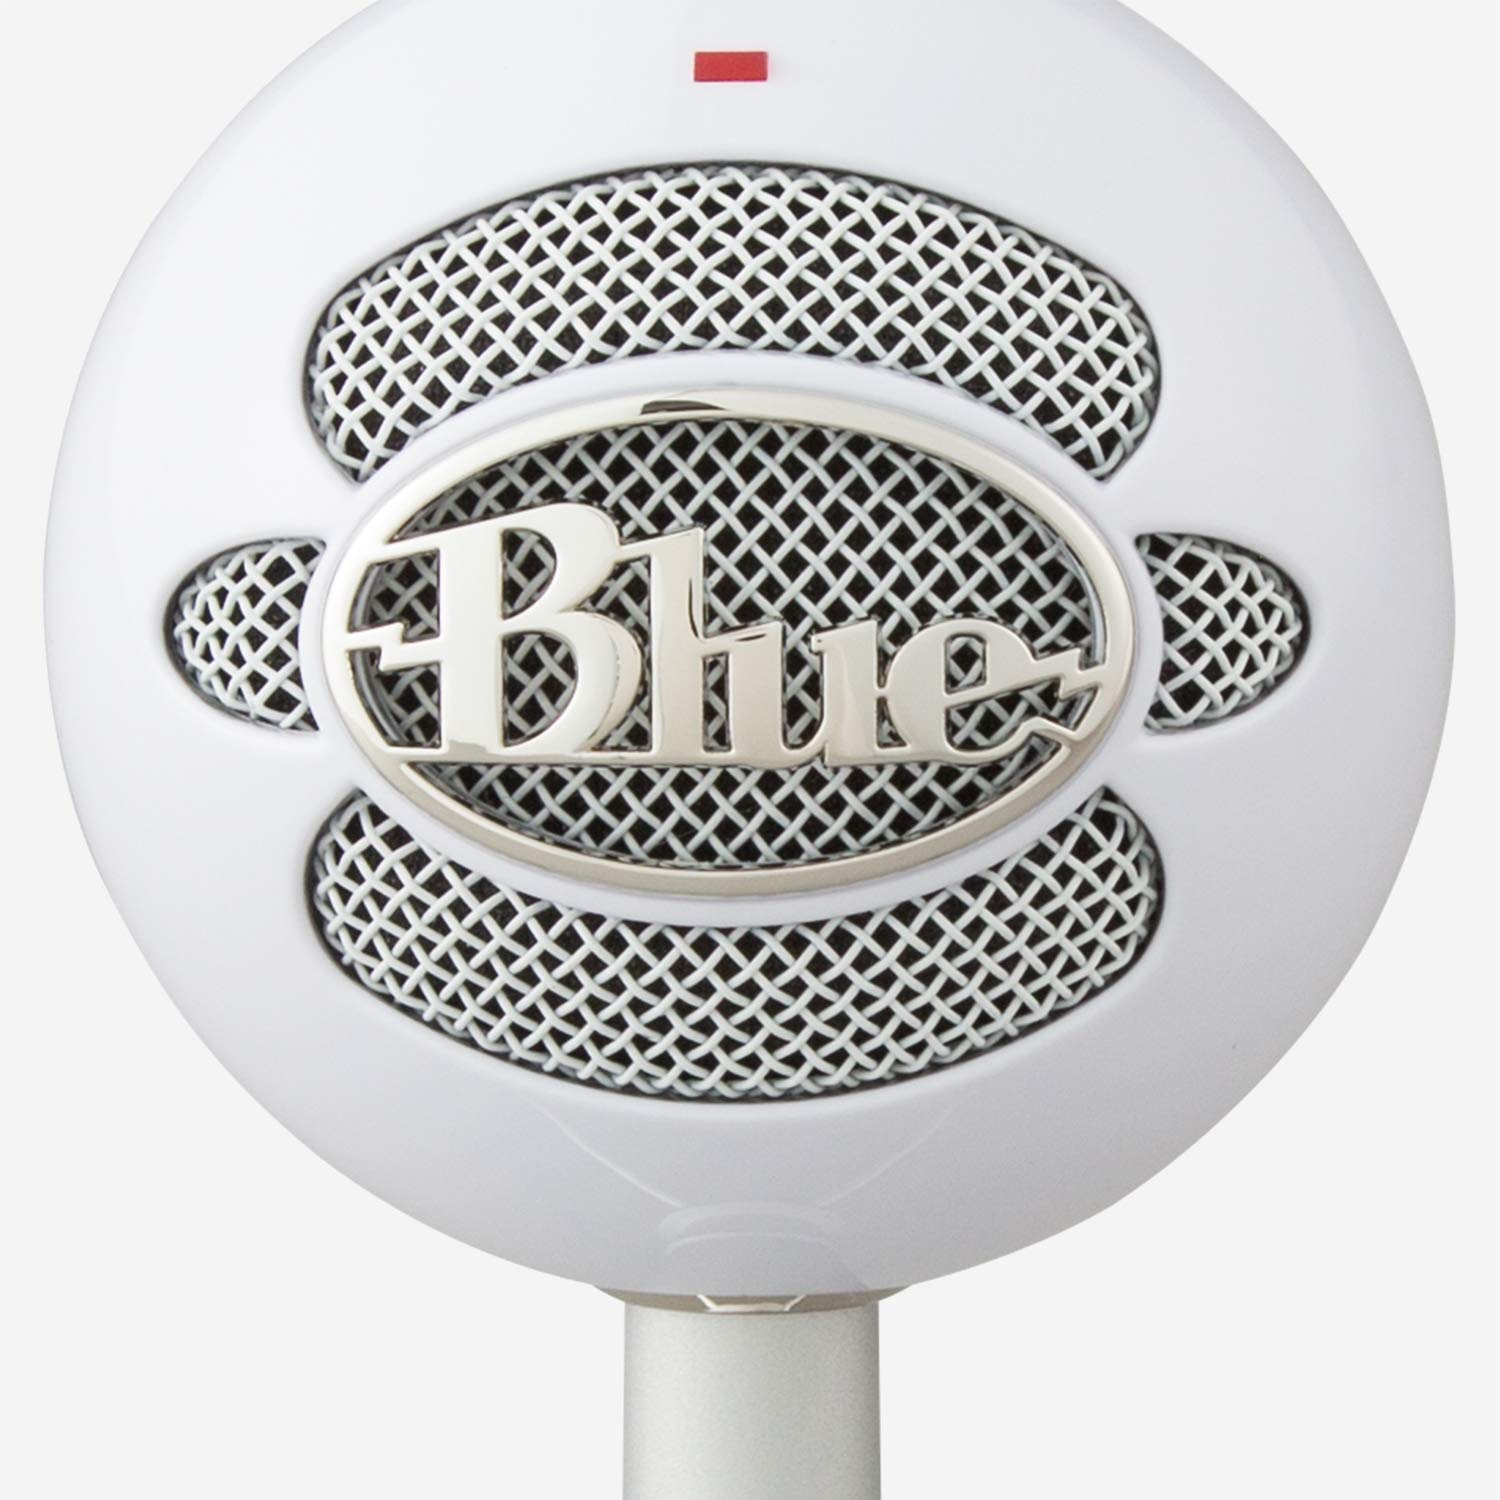 Blue Snowball iCE USB Mic for Recording and Streaming on PC and Mac, C –  Bryan House Quilts